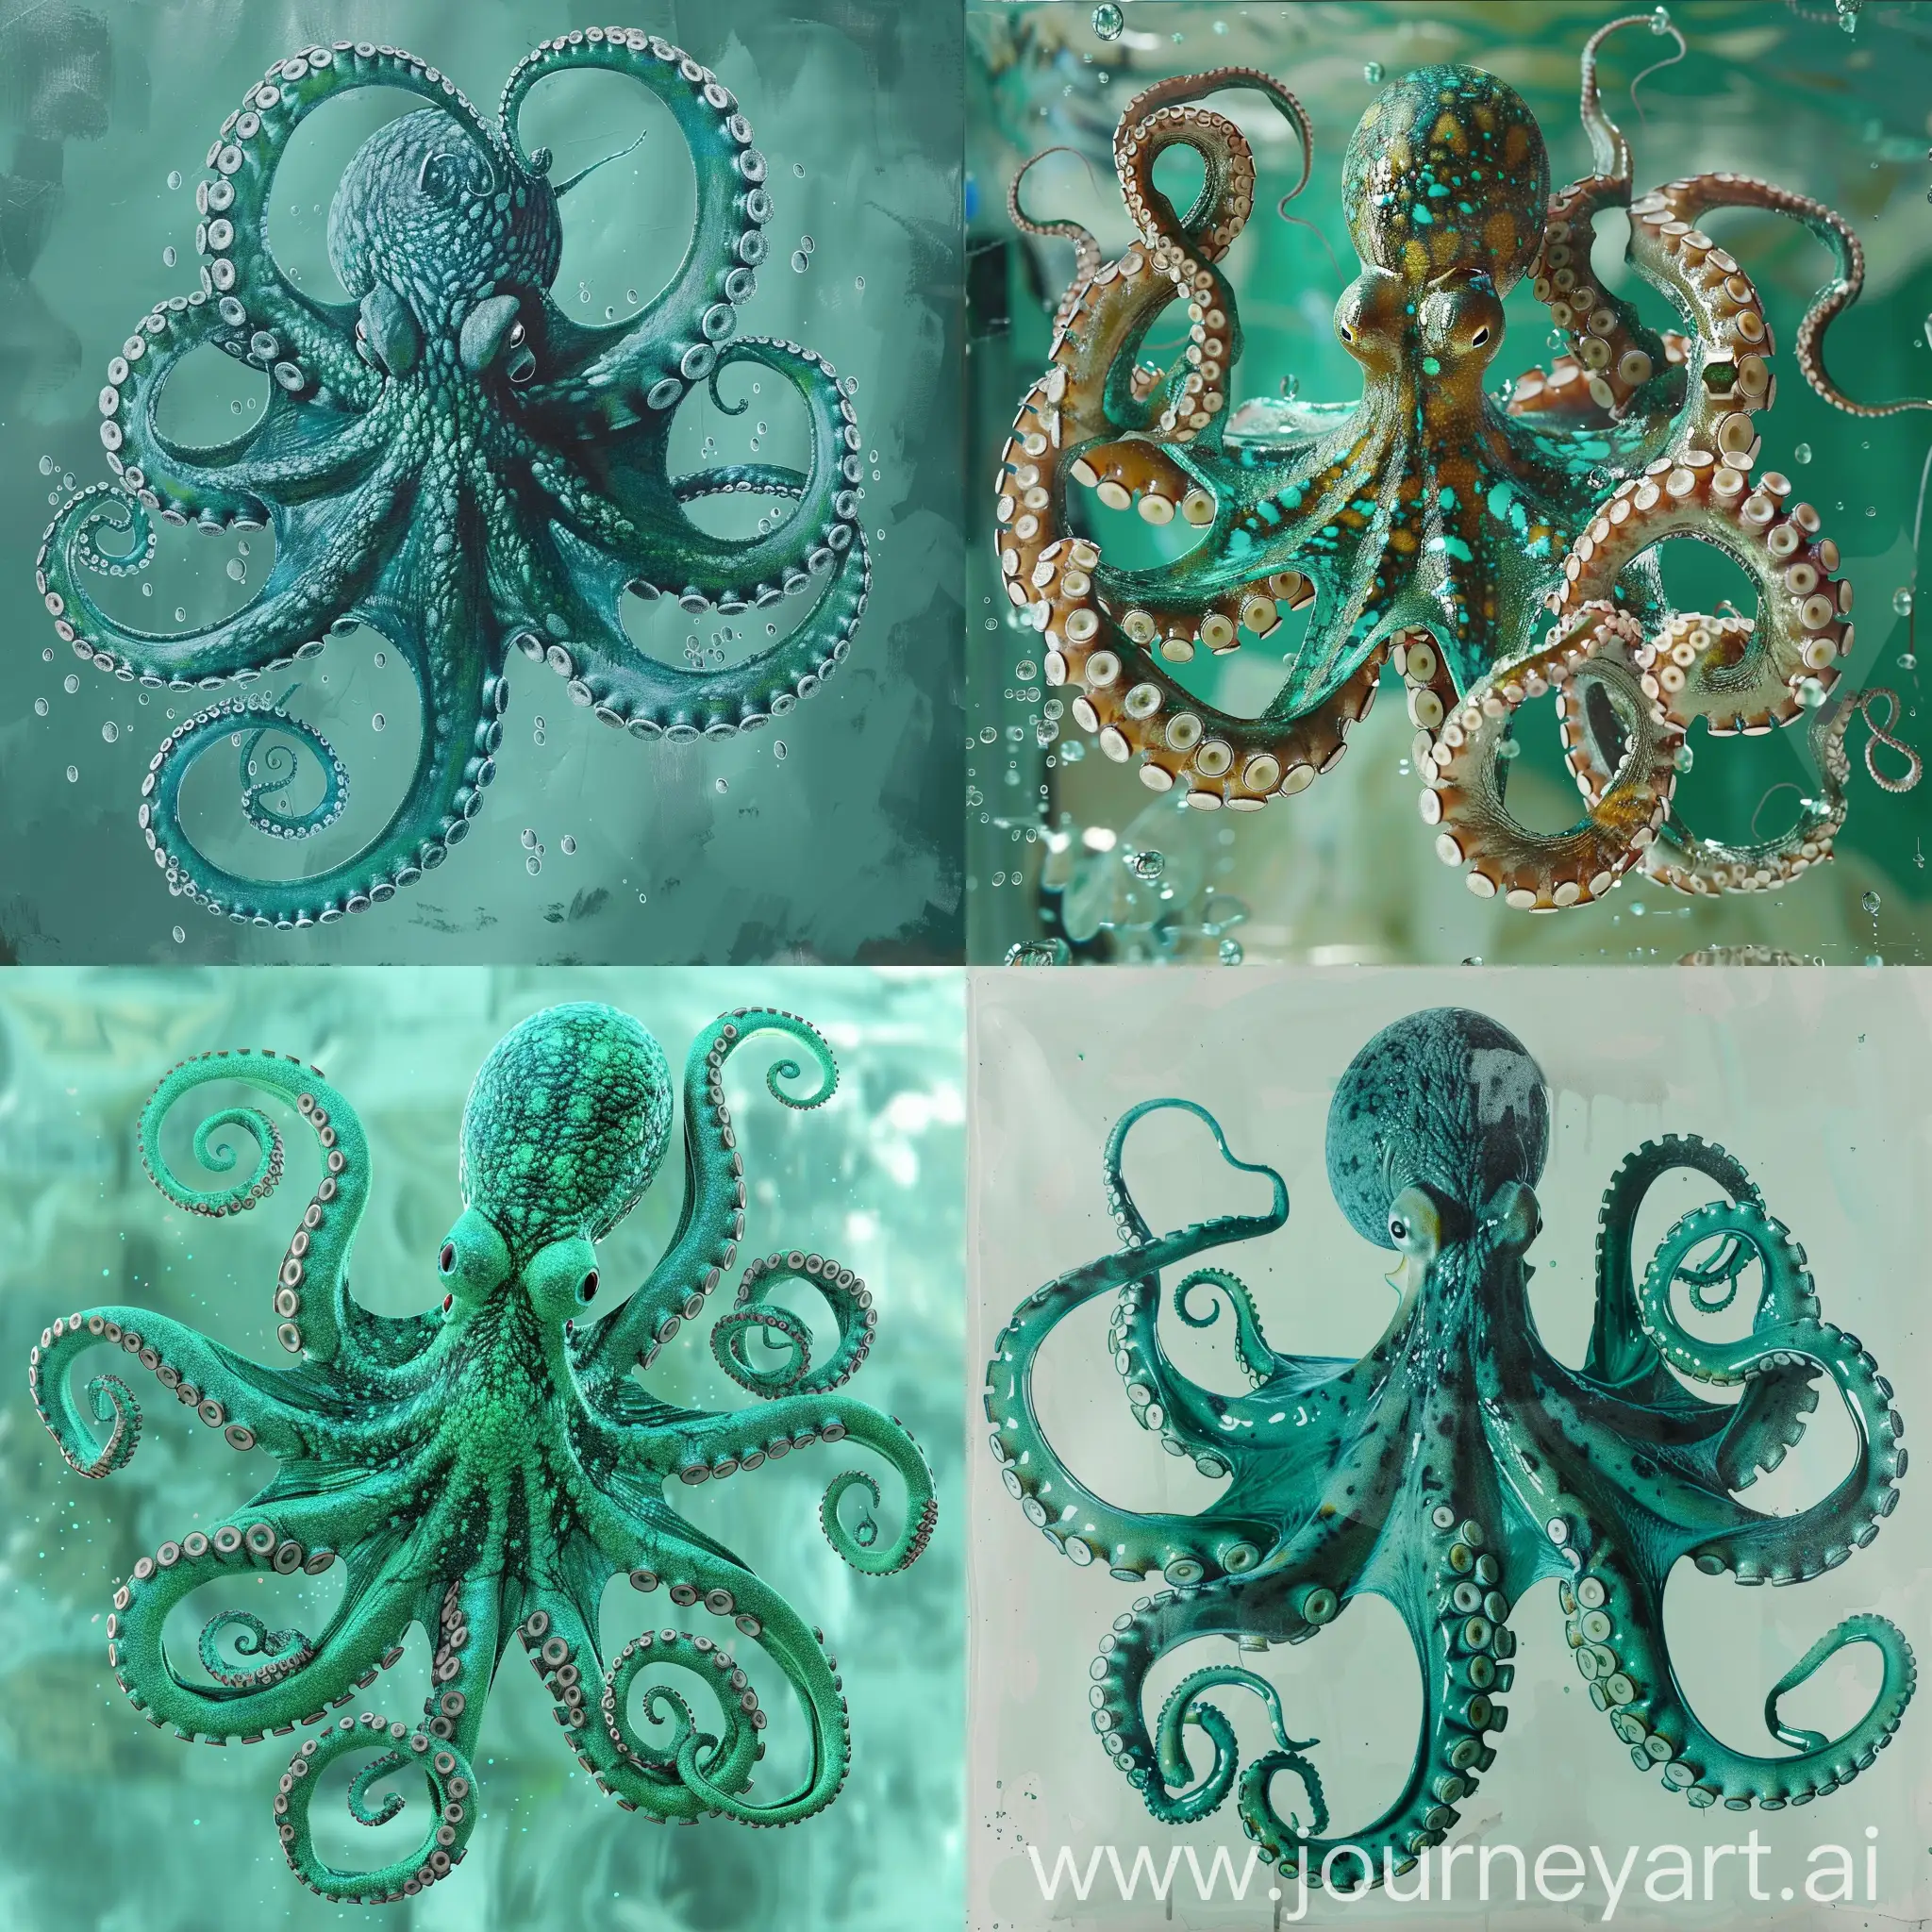 create an artistic print of an octopus on a clear background using teal green and turquoise colours use the style of the image attached as a guide 